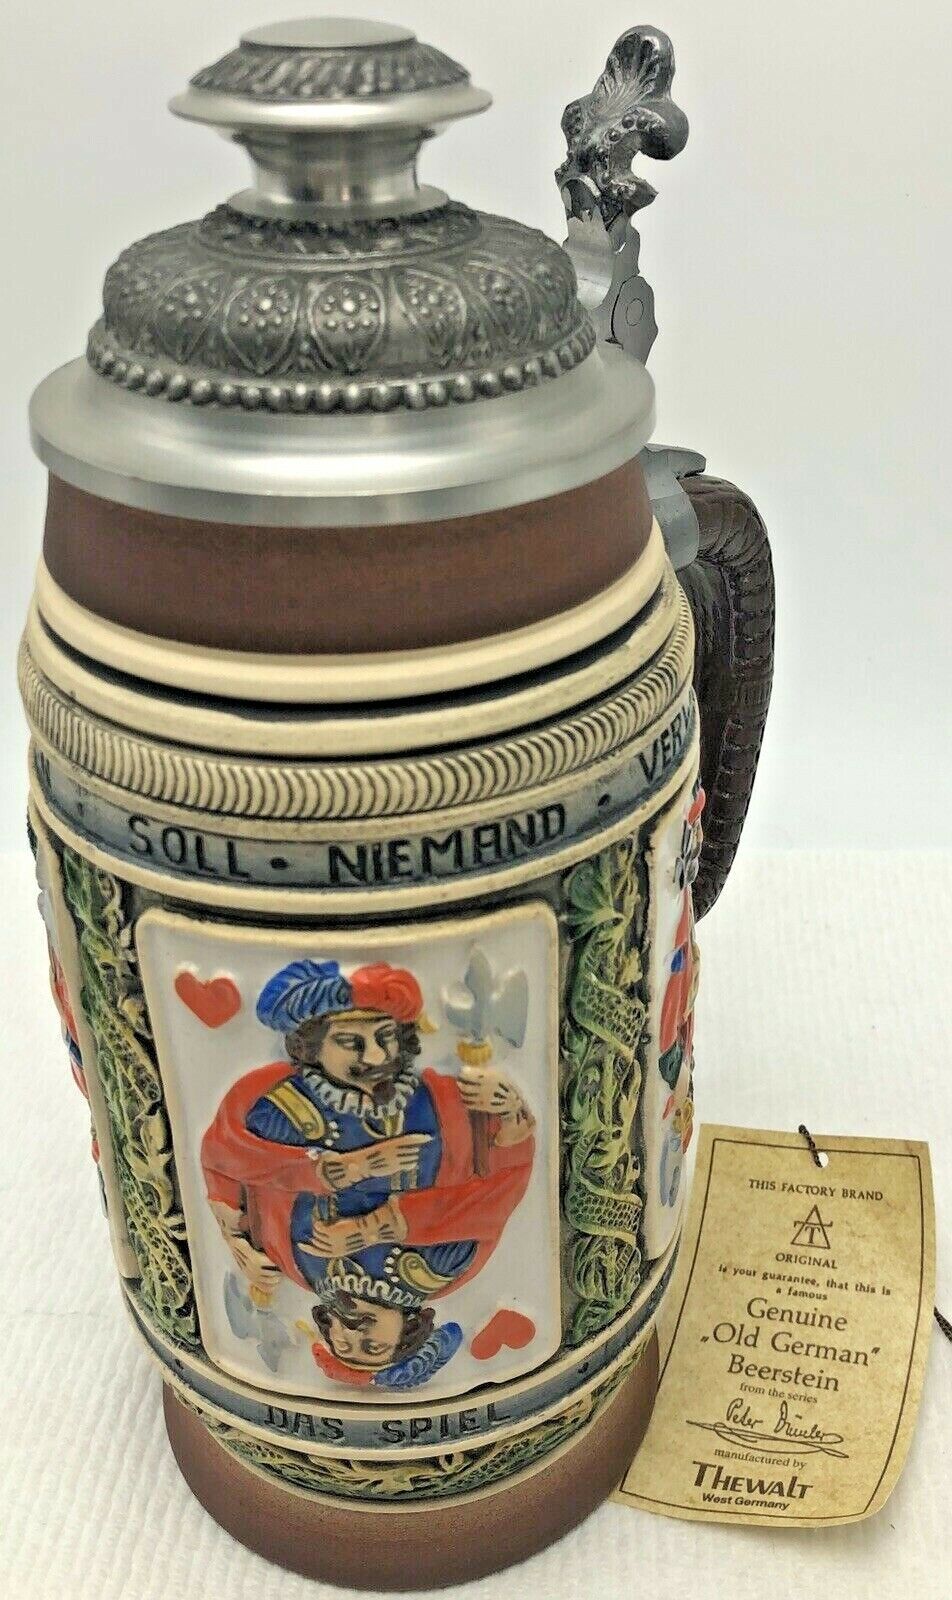 Vintage Thewalt Peter Dumler Beer Stein Relief Playing Cards Limited Edition